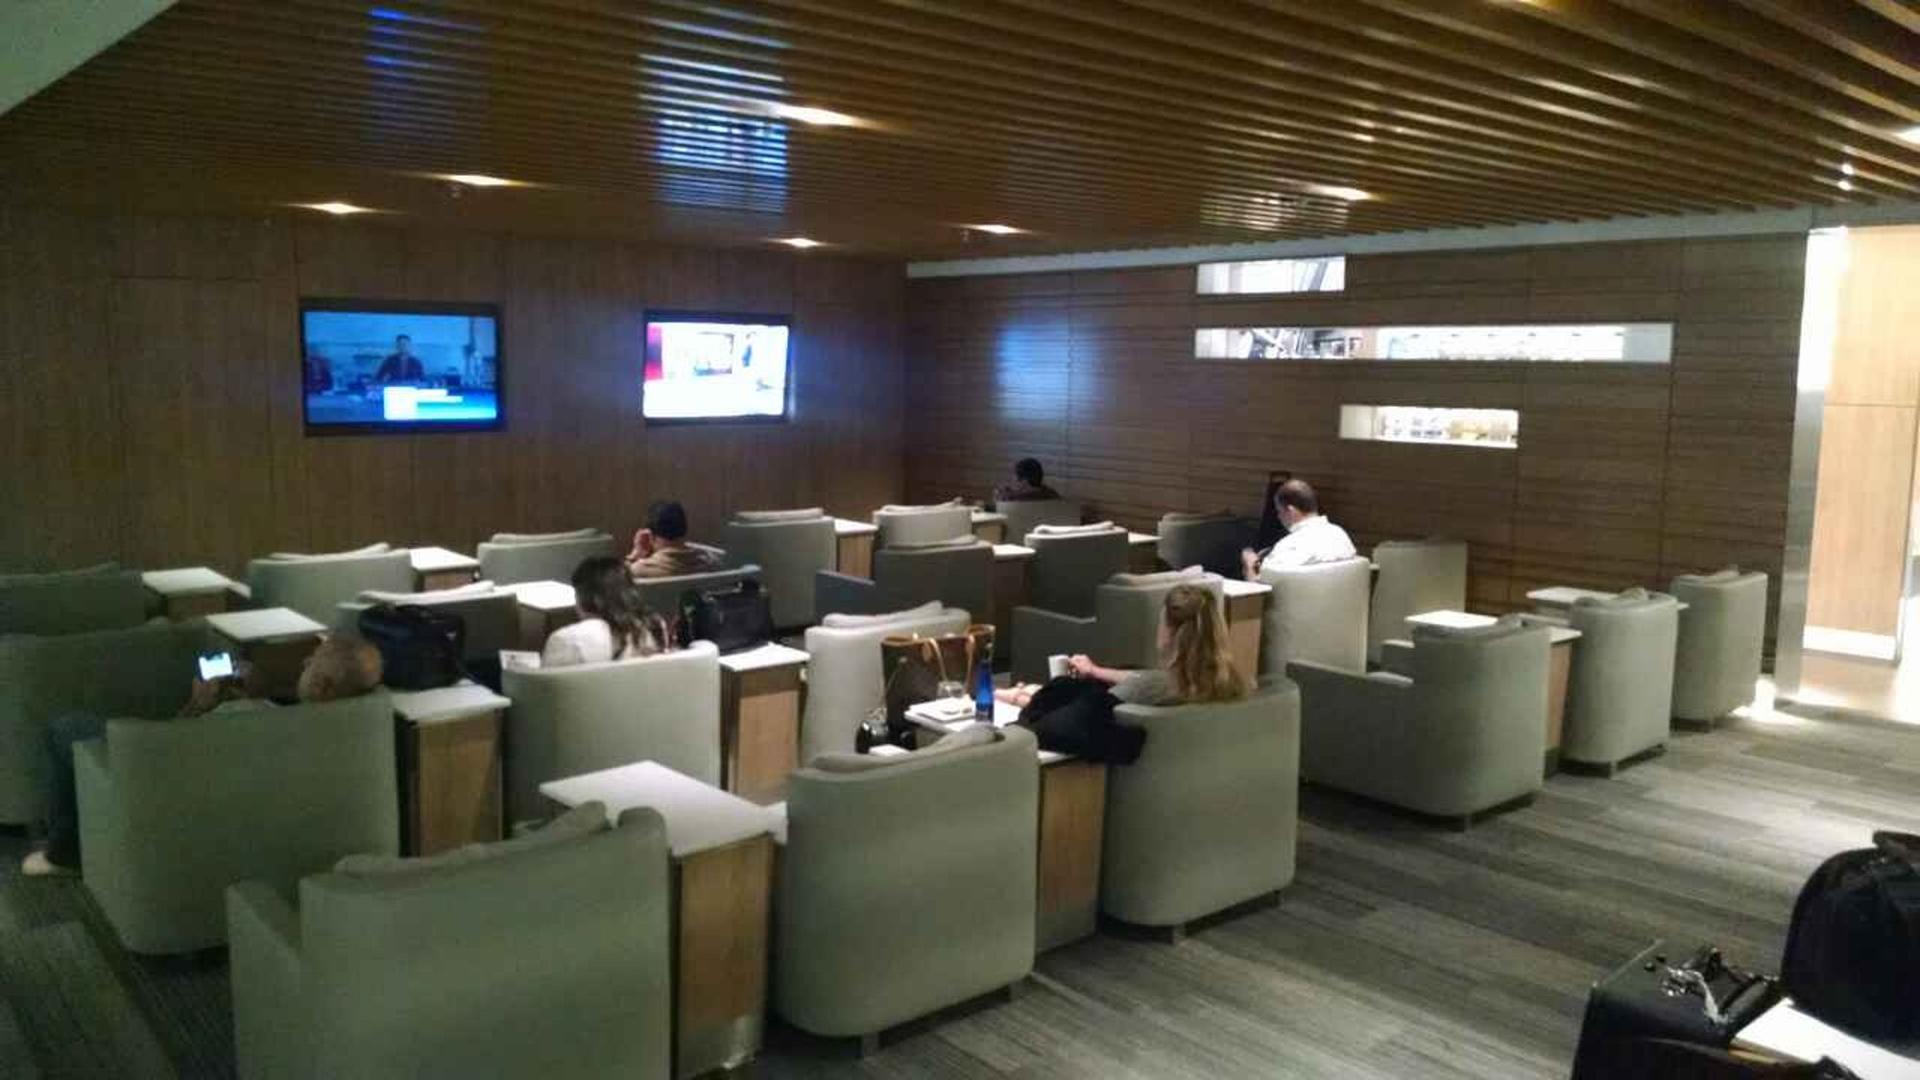 American Airlines Admirals Club image 5 of 30